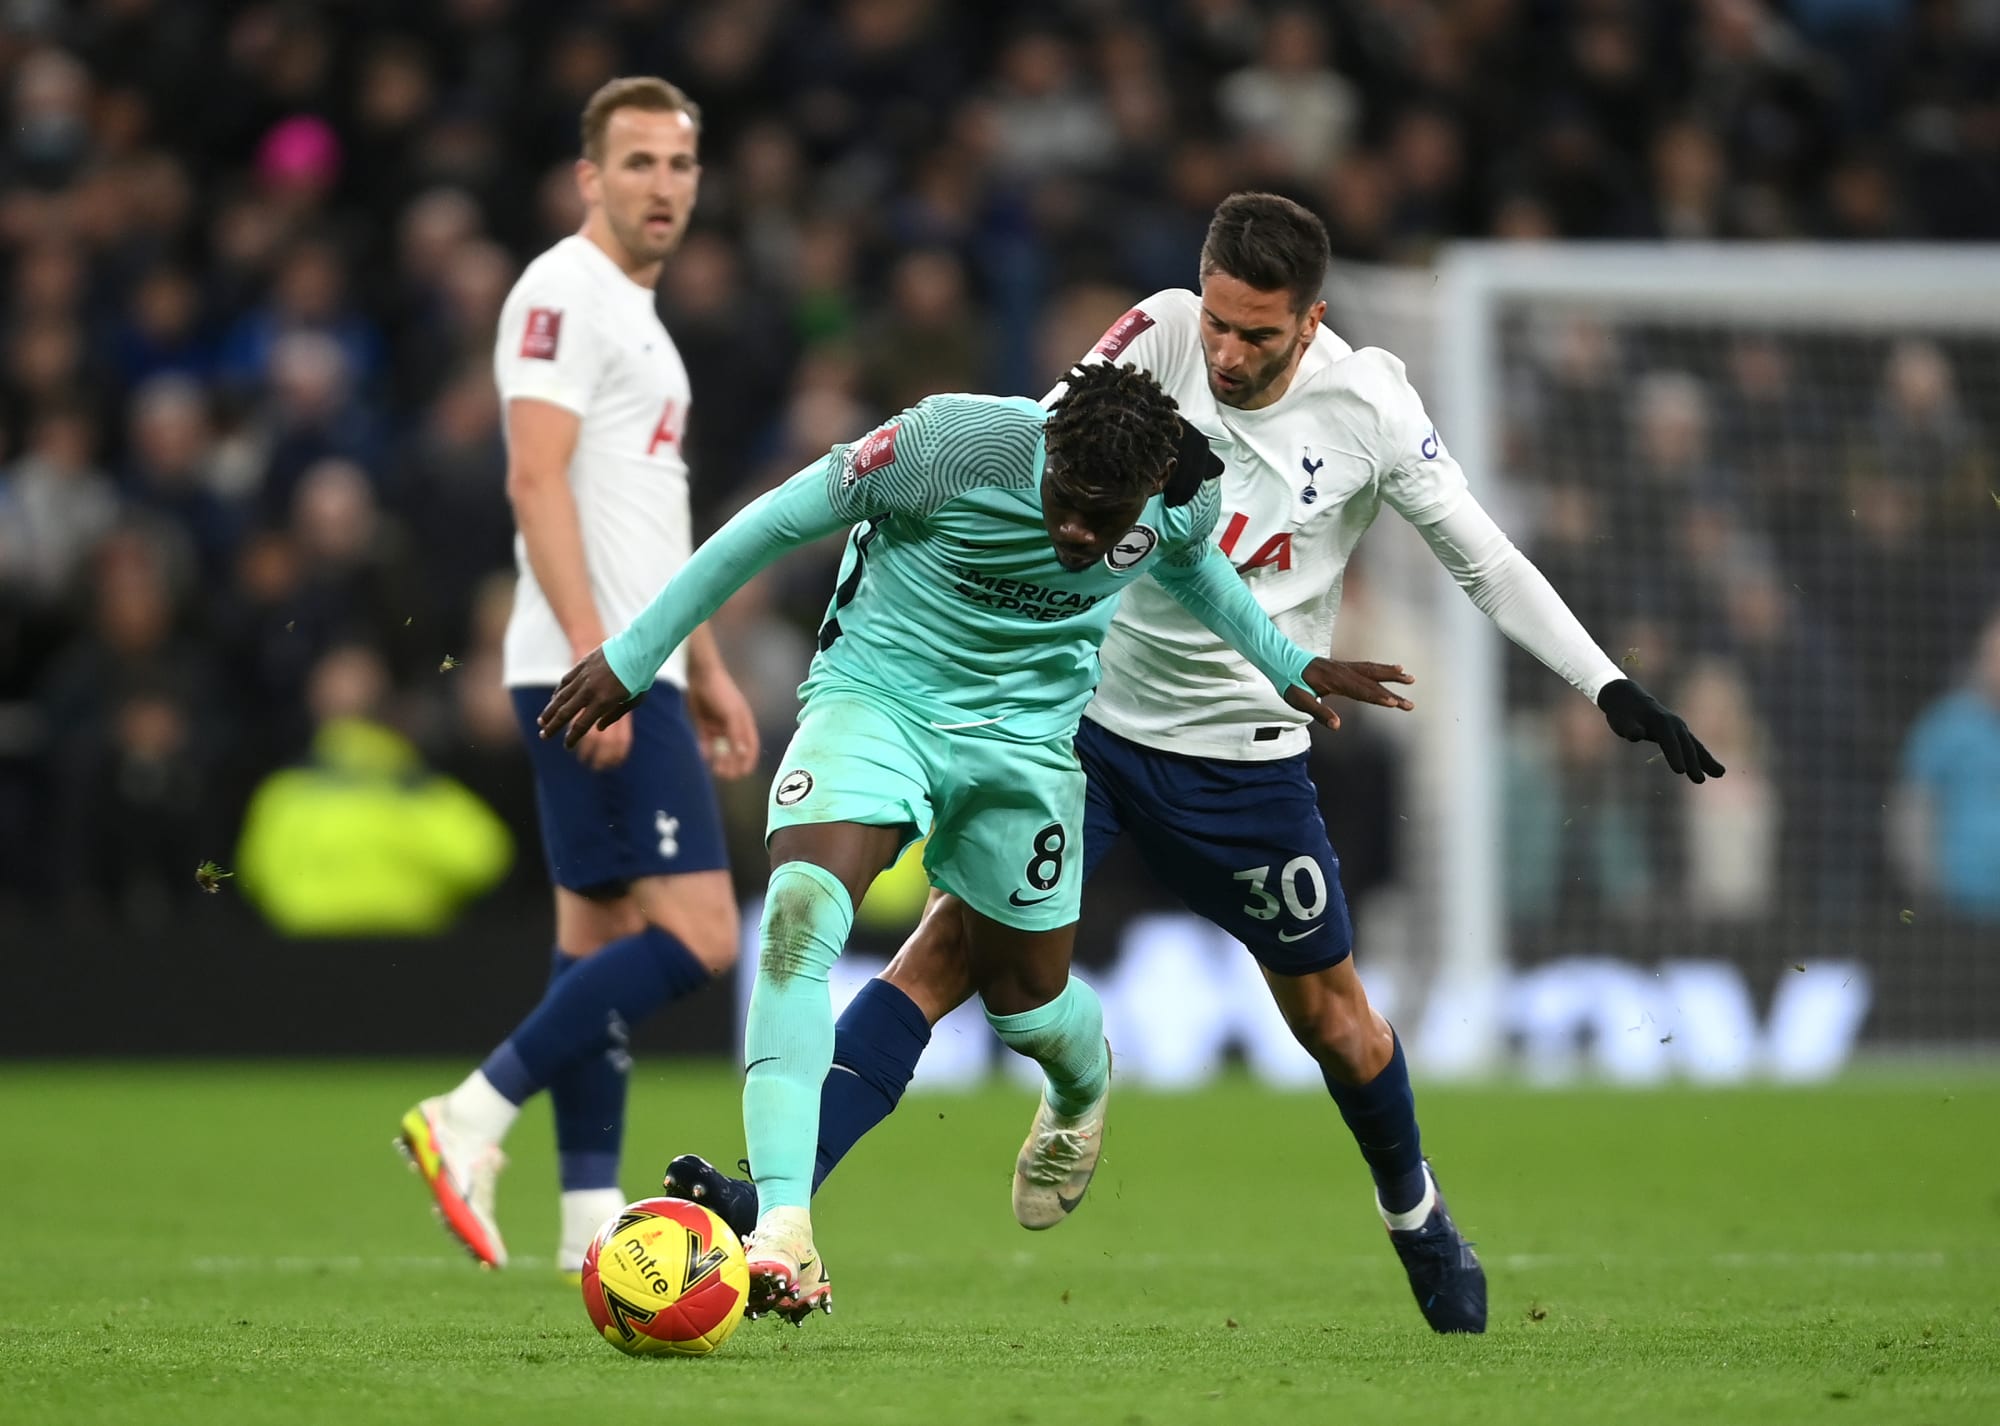 Why Yves Bissouma will be immense for Tottenham Hotspur